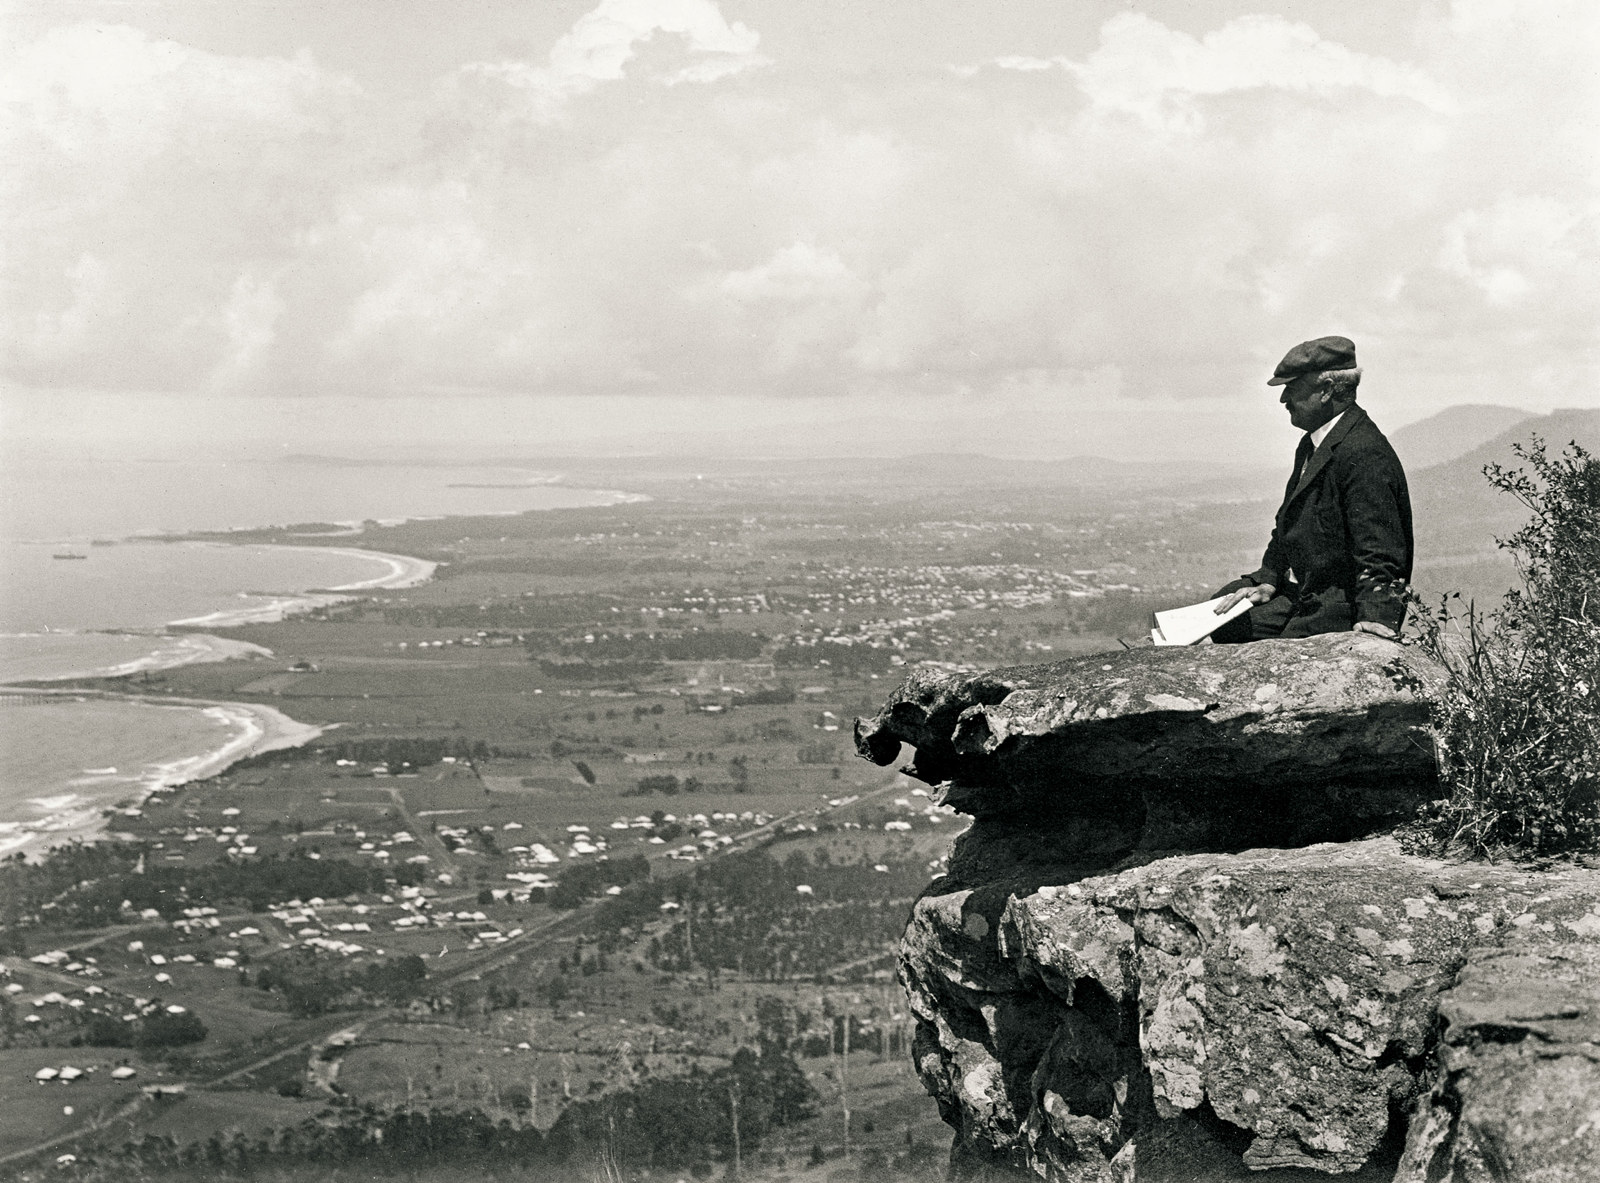 Man sits on a rock at the edge of an escarpment with a dramatic view showing a sweeping coastline, fields and dotted with houses.